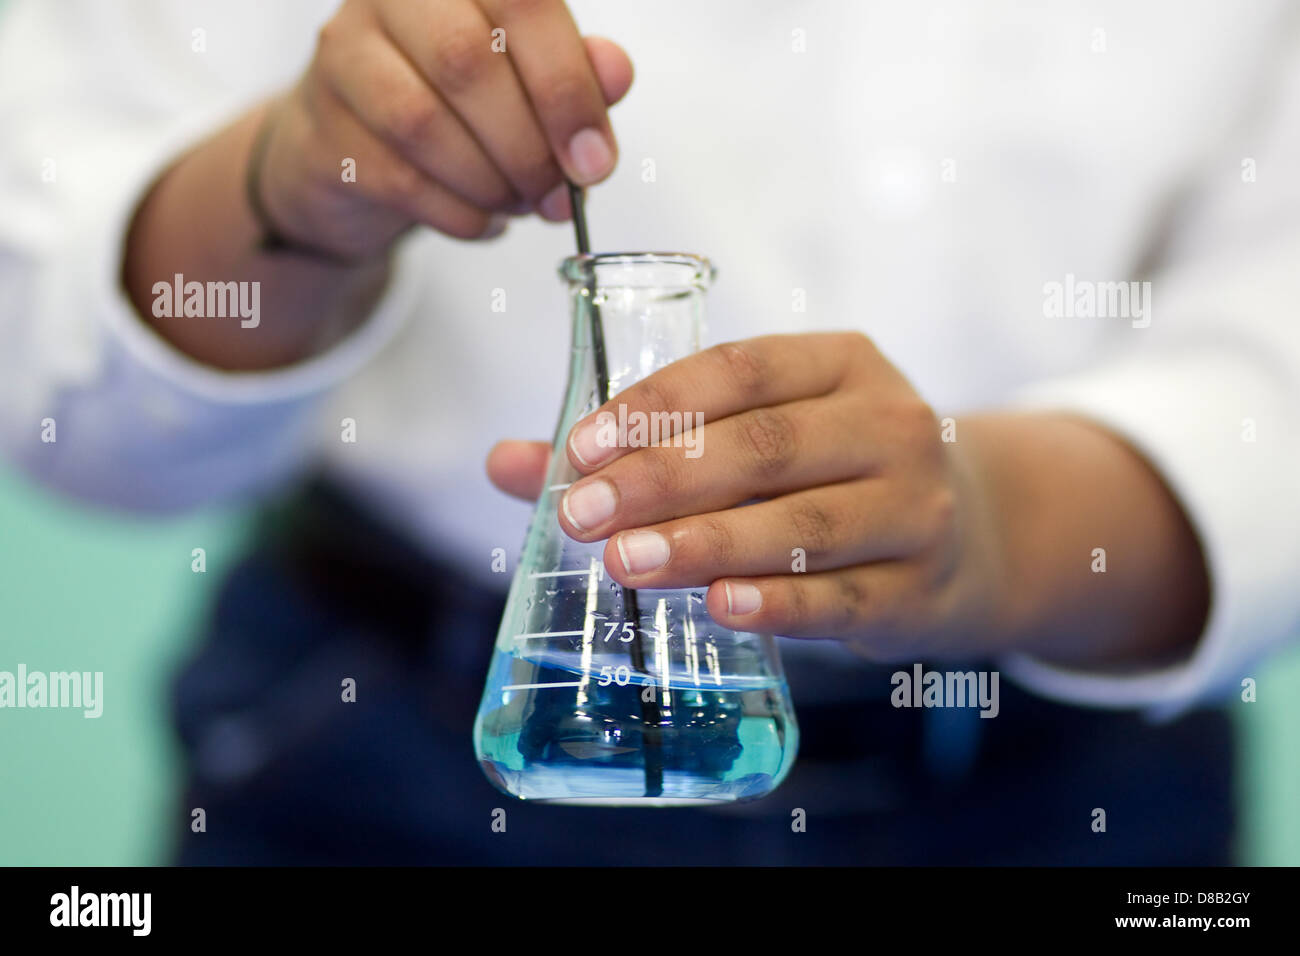 Male high school student of middle eastern decent, uses beaker  during science fair demonstration Stock Photo